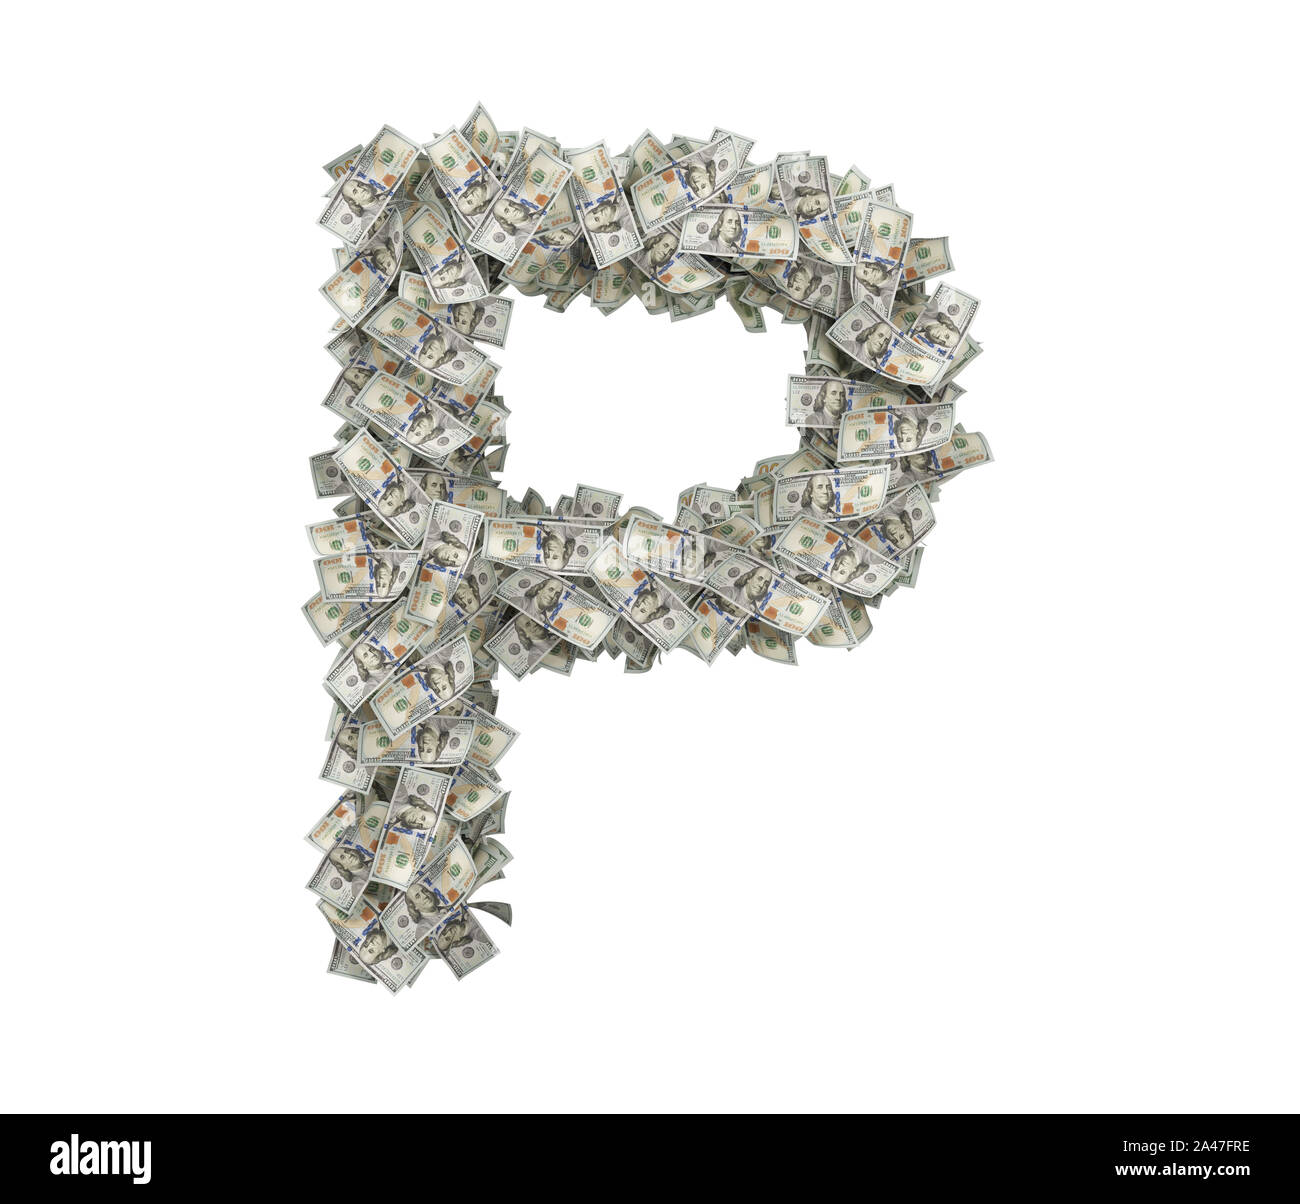 3d rendering of a large isolated large letter P made of many one hundred dollar bills. Money and bills. American currency. Alphabet and letters. Stock Photo